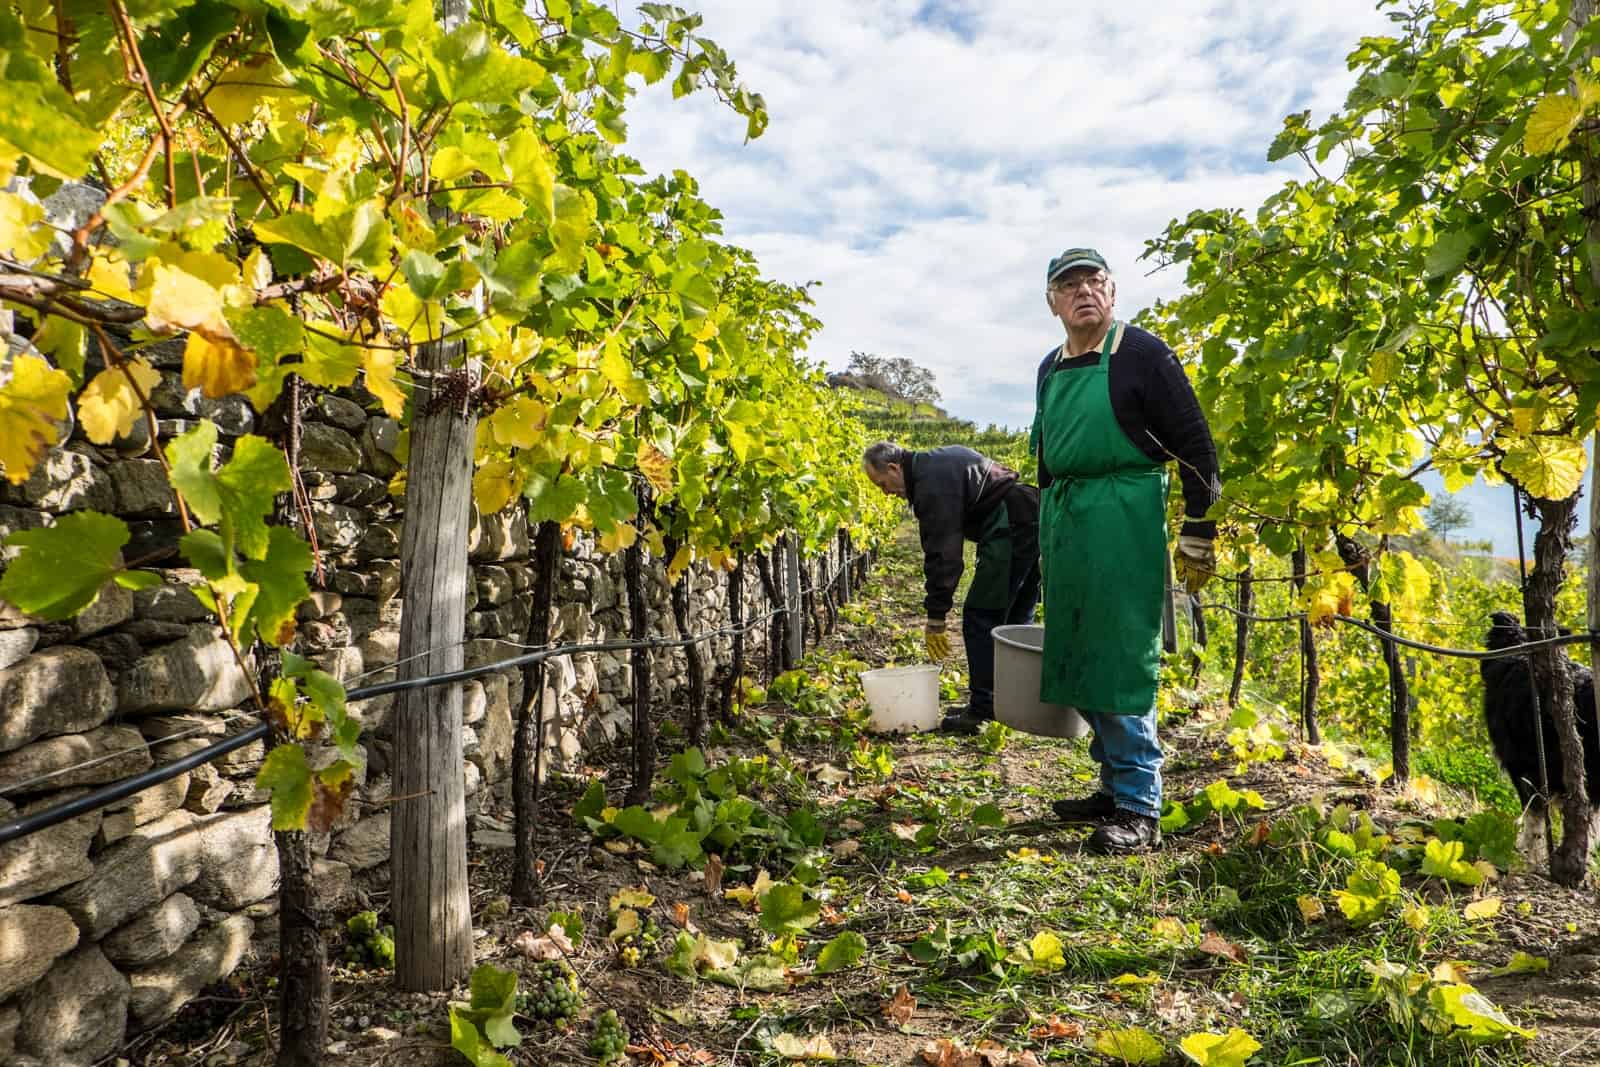 A man in a green apron stands in a vine row in the Wachau Valley. Behind the vines withe green and yellow leaves are the stone walls that form part of the history of winemaking in the region